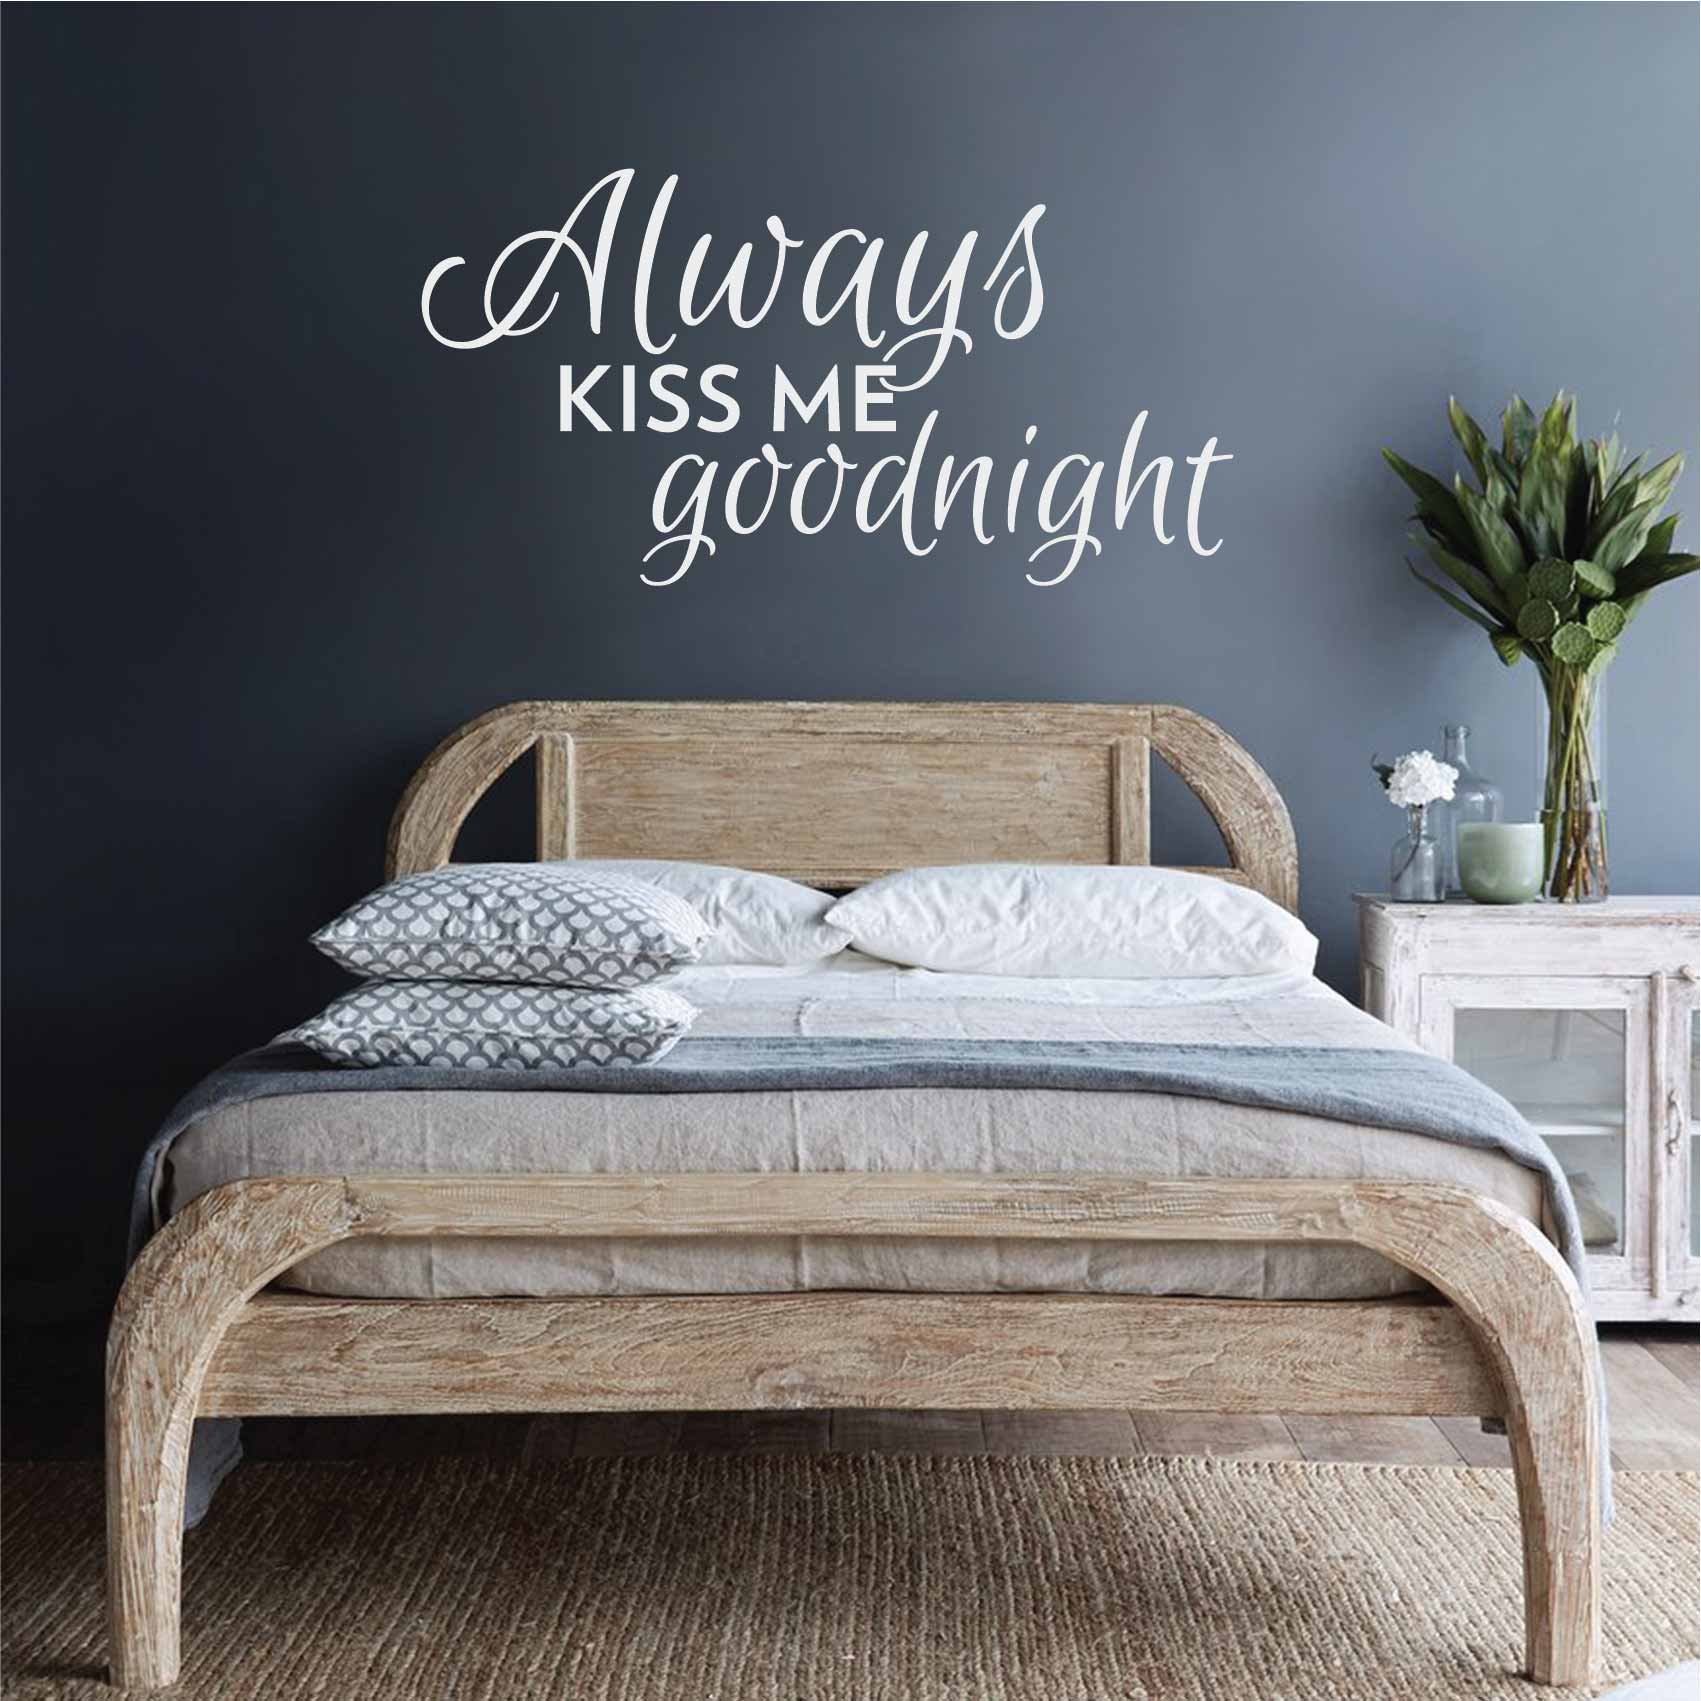 stickers-always-kiss-me-goodnight-ref41chambre-stickers-muraux-chambre-autocollant-deco-chambre-salon-cuisine-sticker-mural-decoration